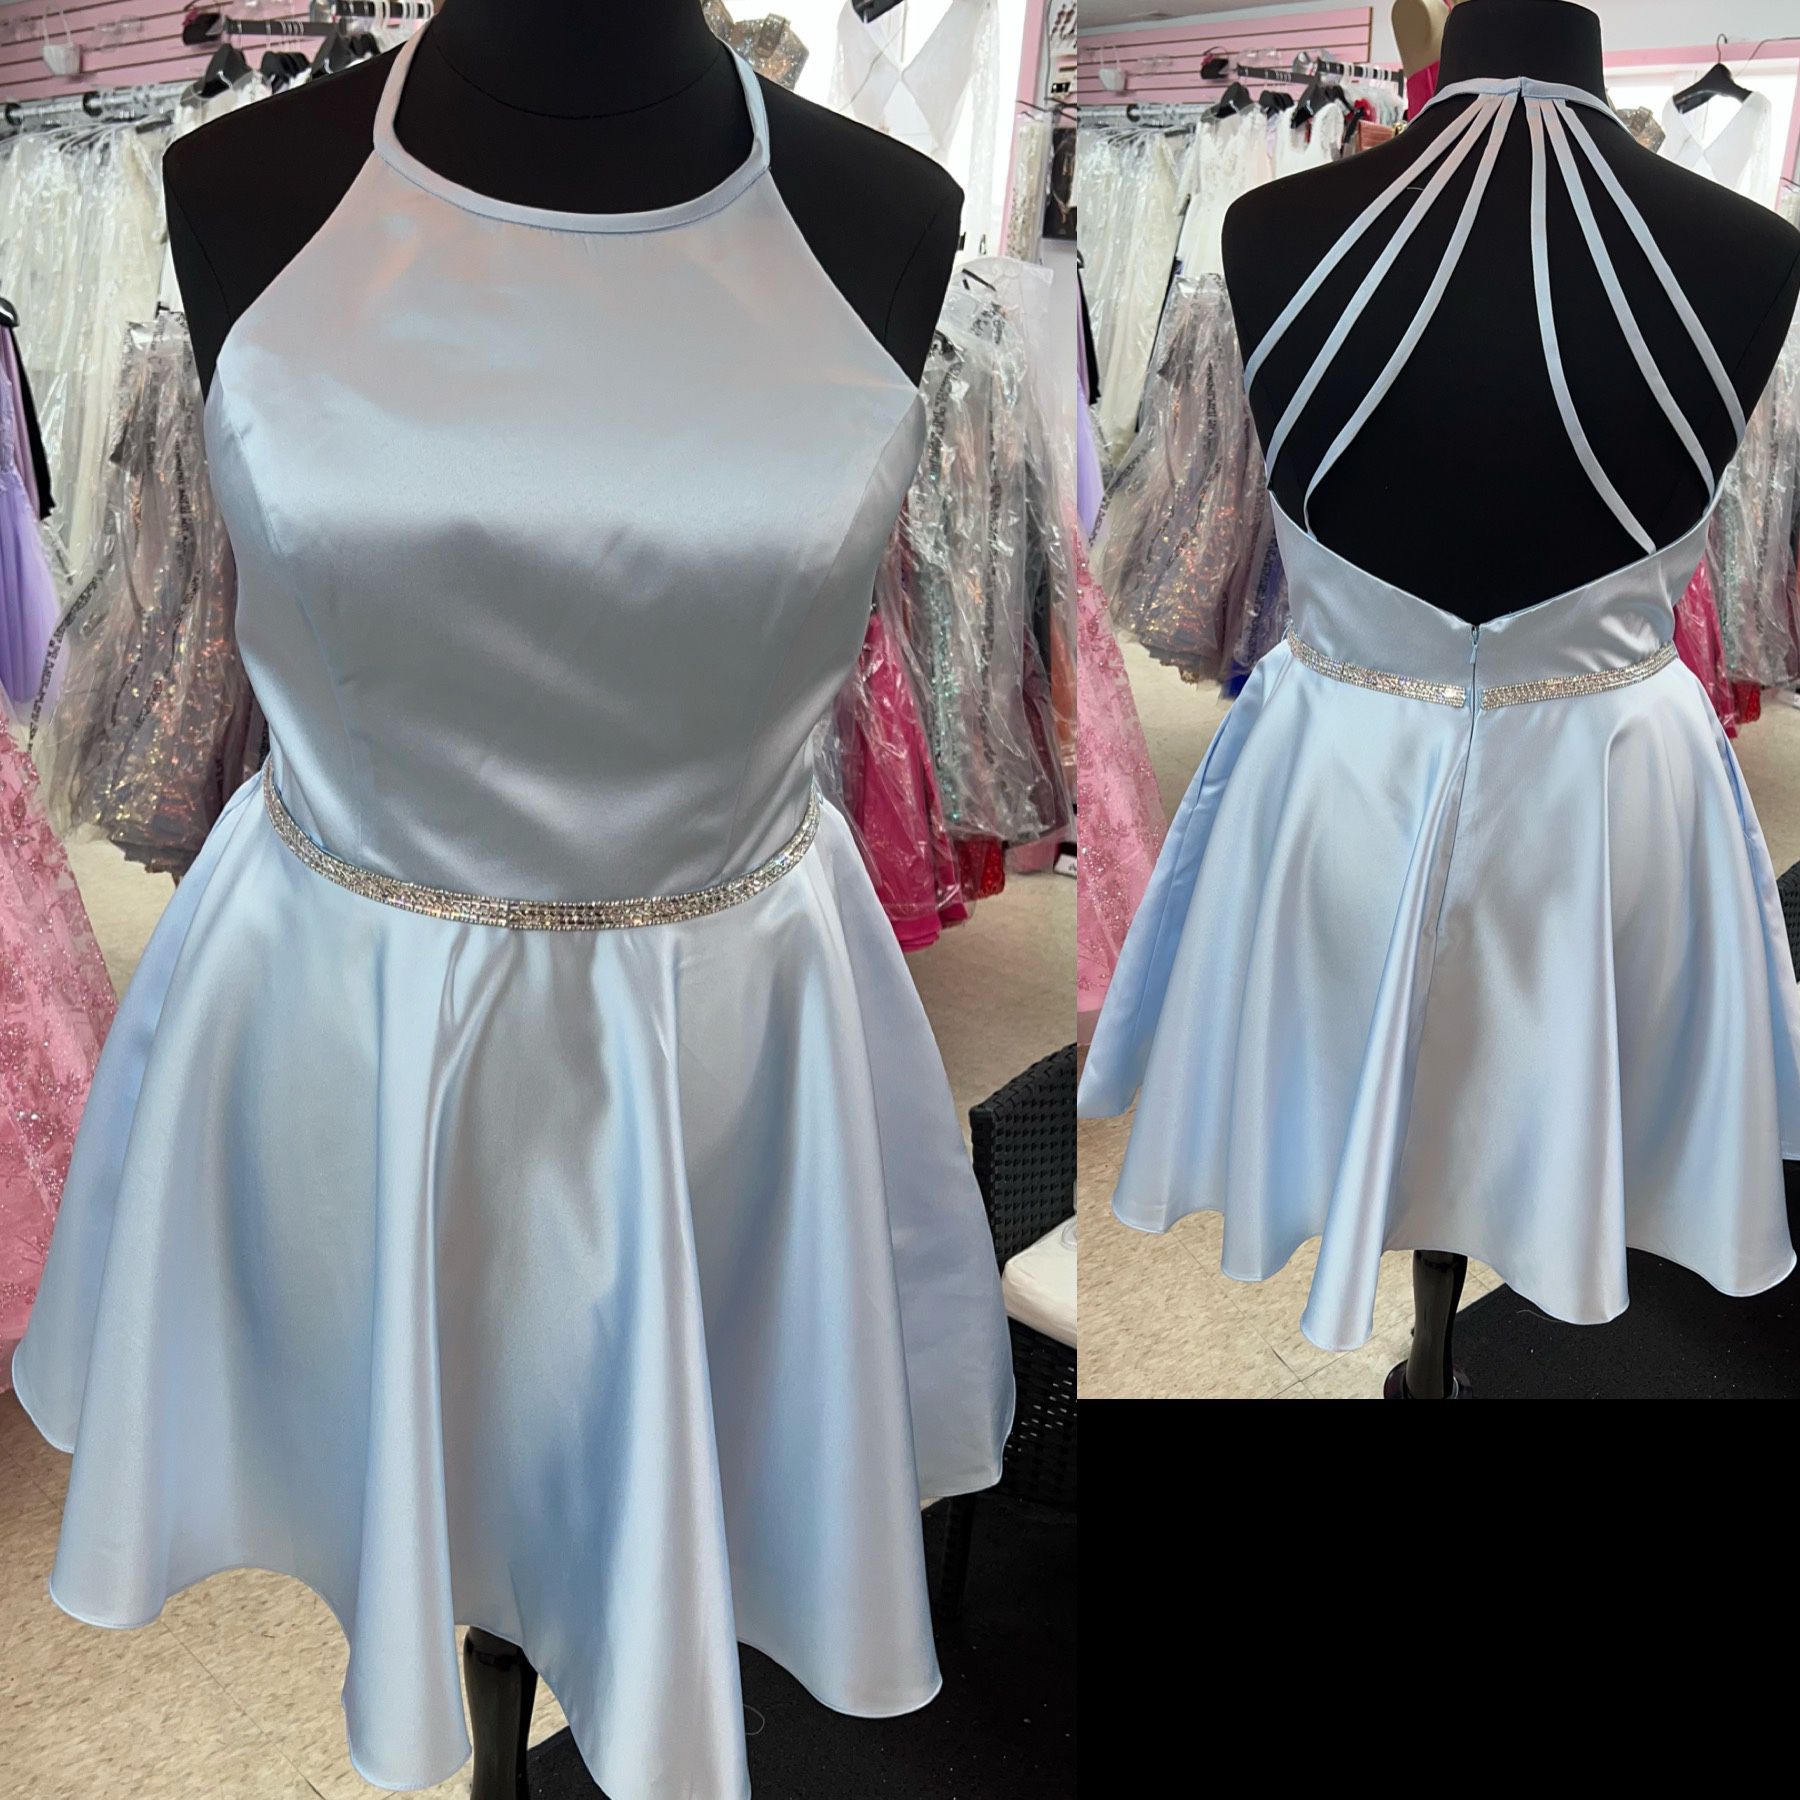 New With Tags Baby Blue Short Formal Dress & Homecoming Dress $65